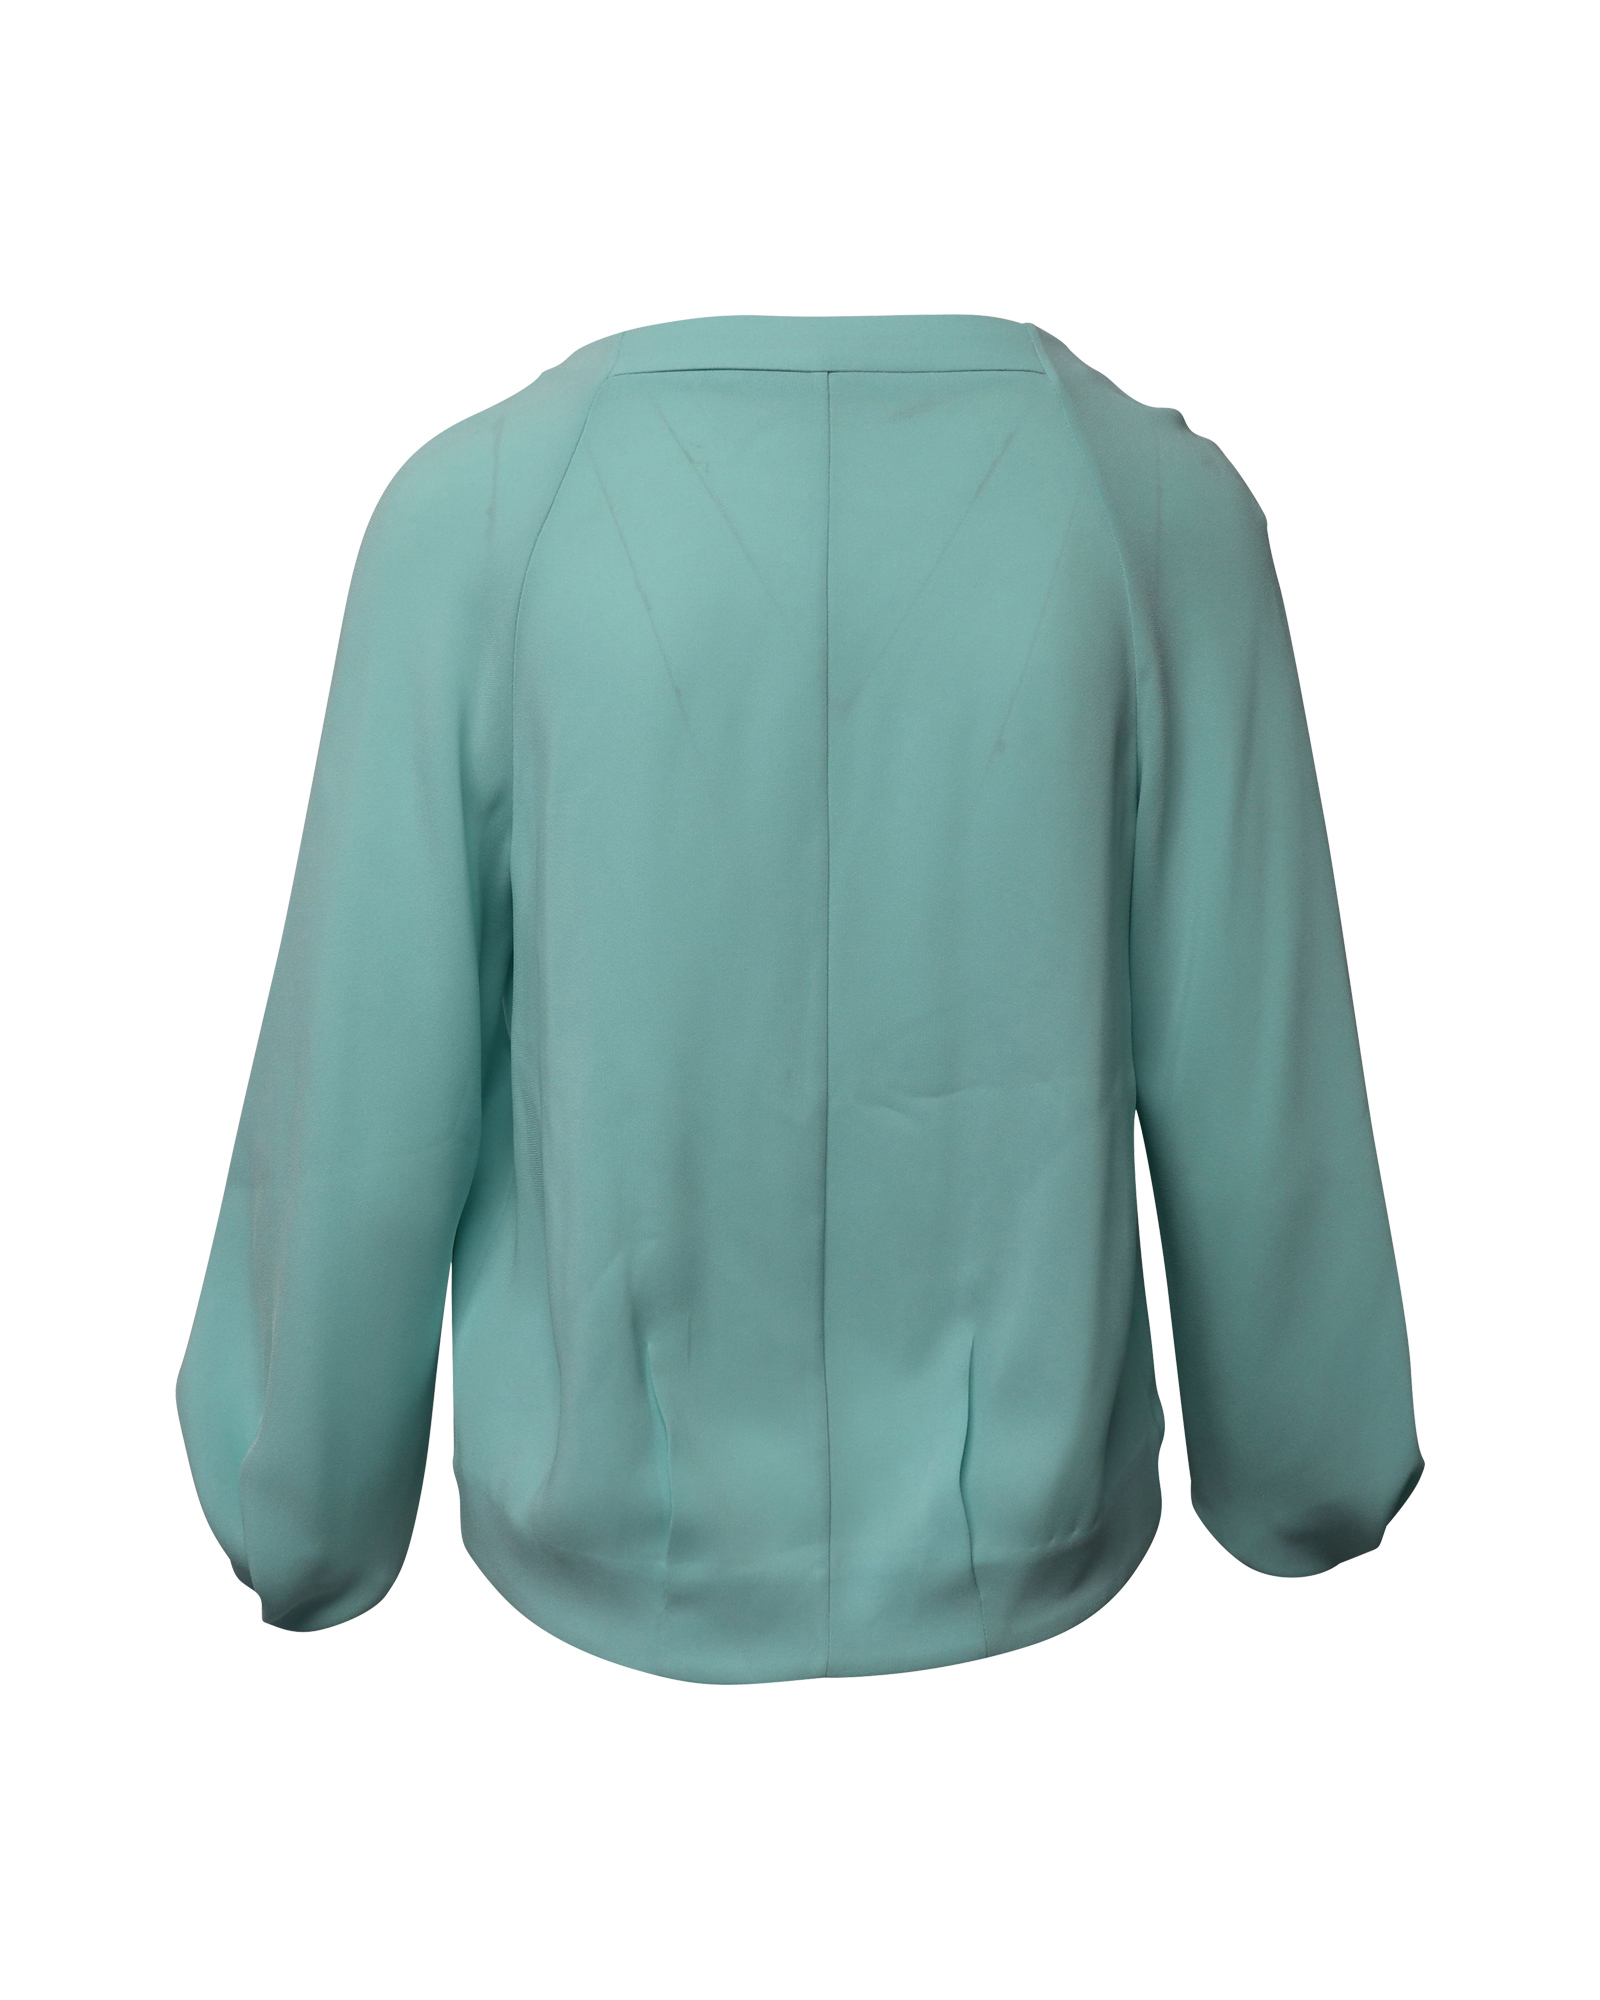 Embellished Long Sleeve Top in Blue Triacetate